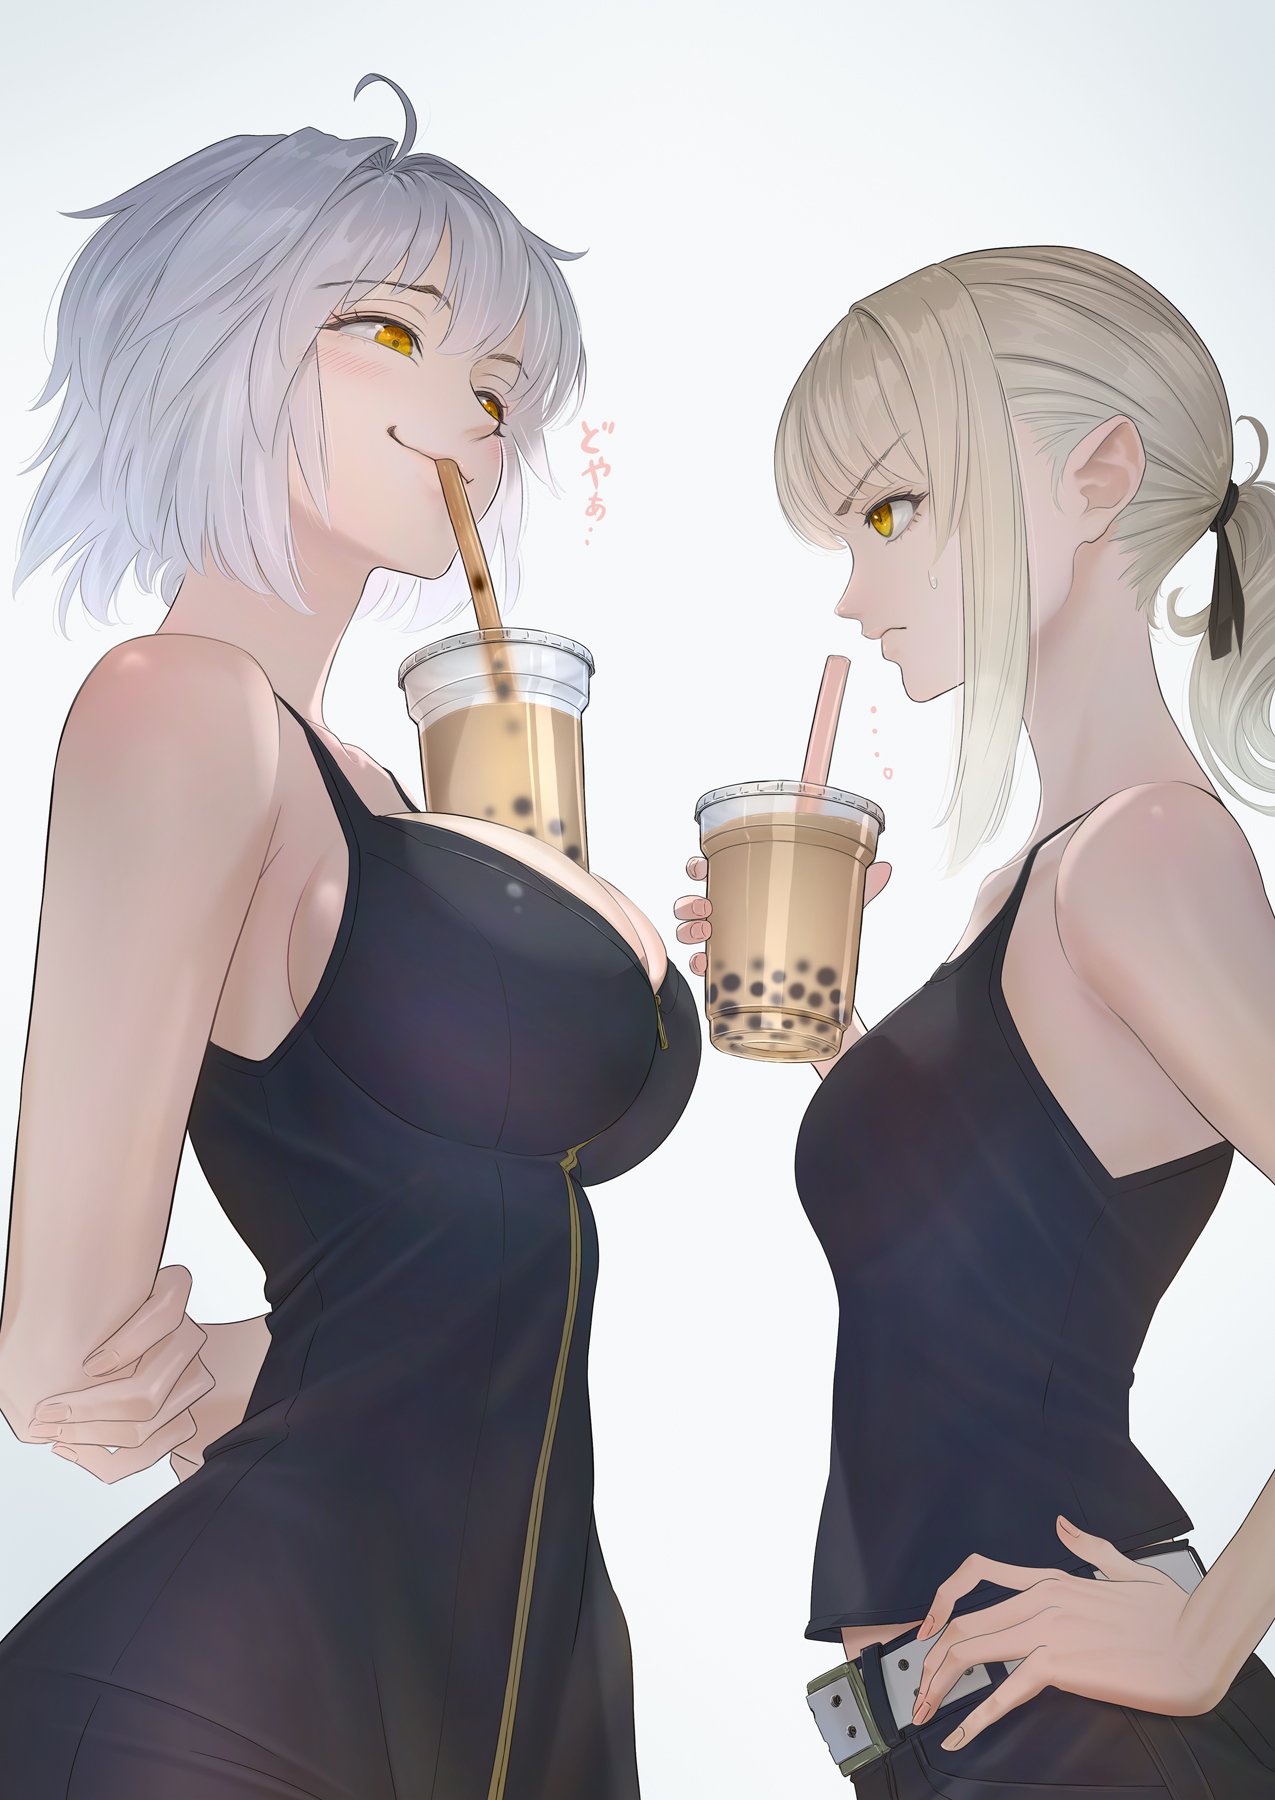 Anime 1275x1800 Fate series Fate/Grand Order anime girls long hair short hair gray hair cleavage 2D smiling small boobs big boobs Jeanne d'Arc (Fate) Jeanne (Alter) (Fate/Grand Order) Saber Alter ecchi curvy ponytail no bra humor drinking black ribbons tight clothing simple background angry blushing arm(s) behind back kanji yellow eyes portrait display fan art sideboob I_MI_ZU dress tank top blonde smug face Artoria Pendragon low-angle